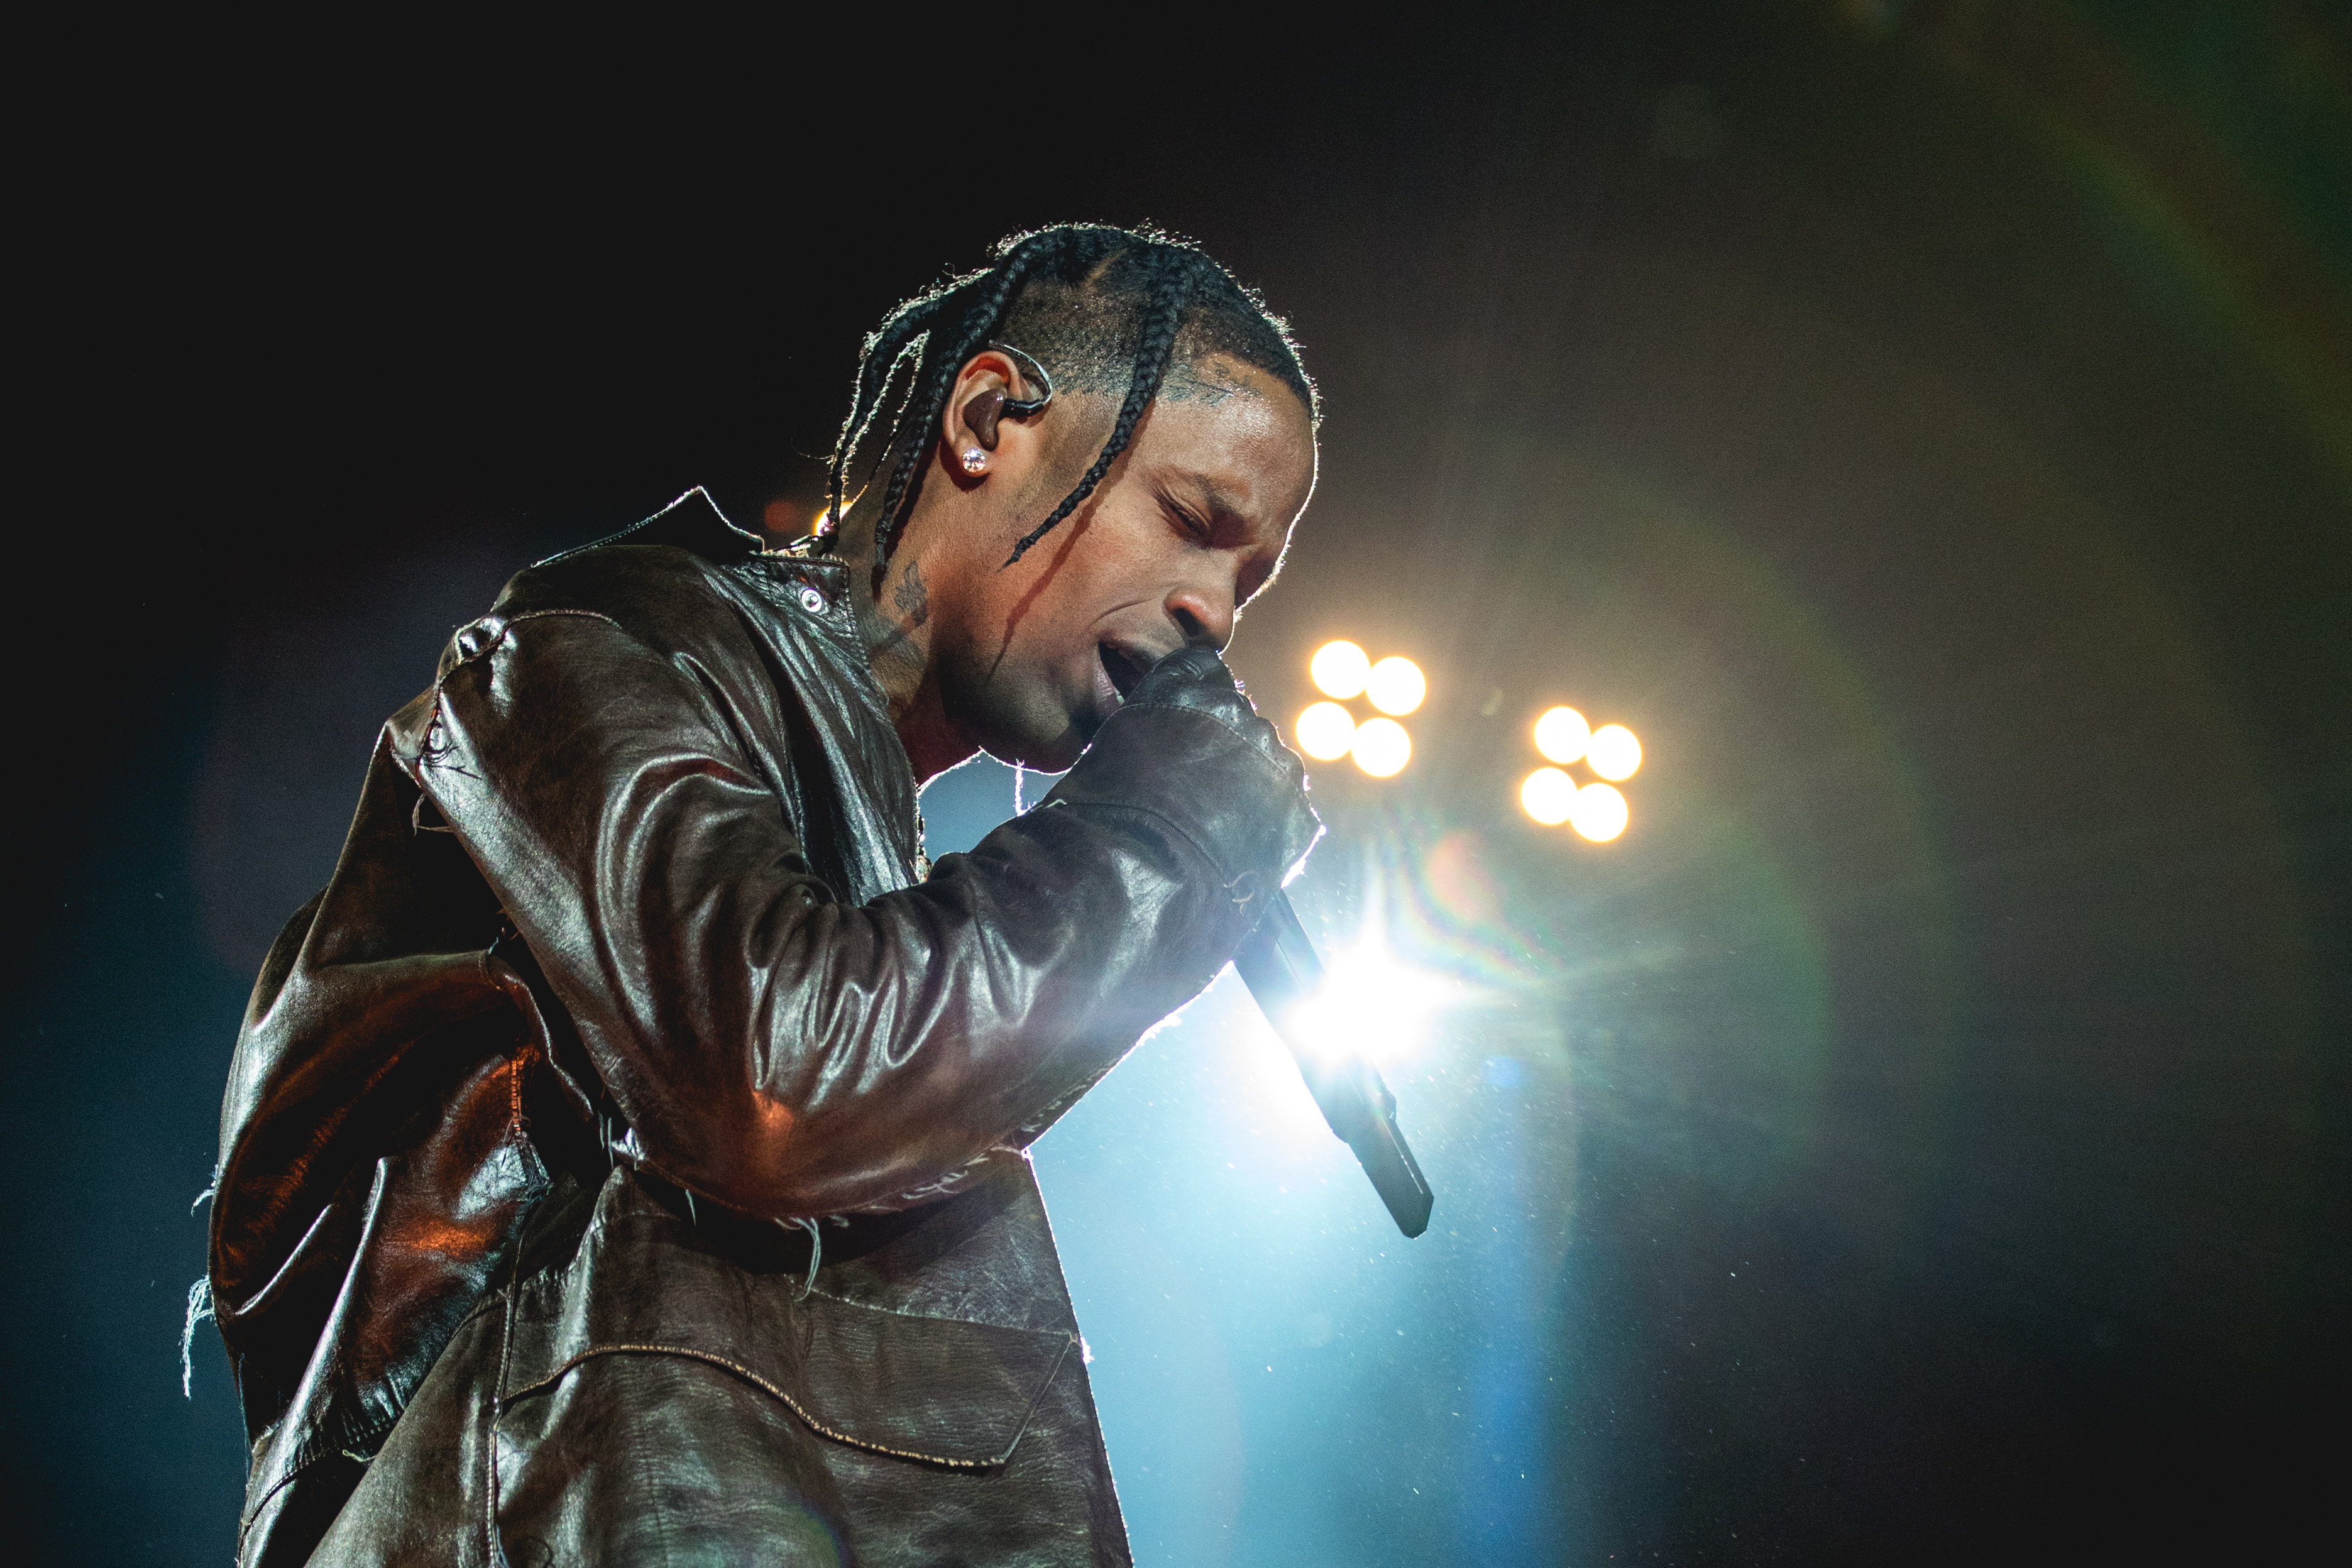 Travis Scott performs a concert at the 2021 Astroworld Festival